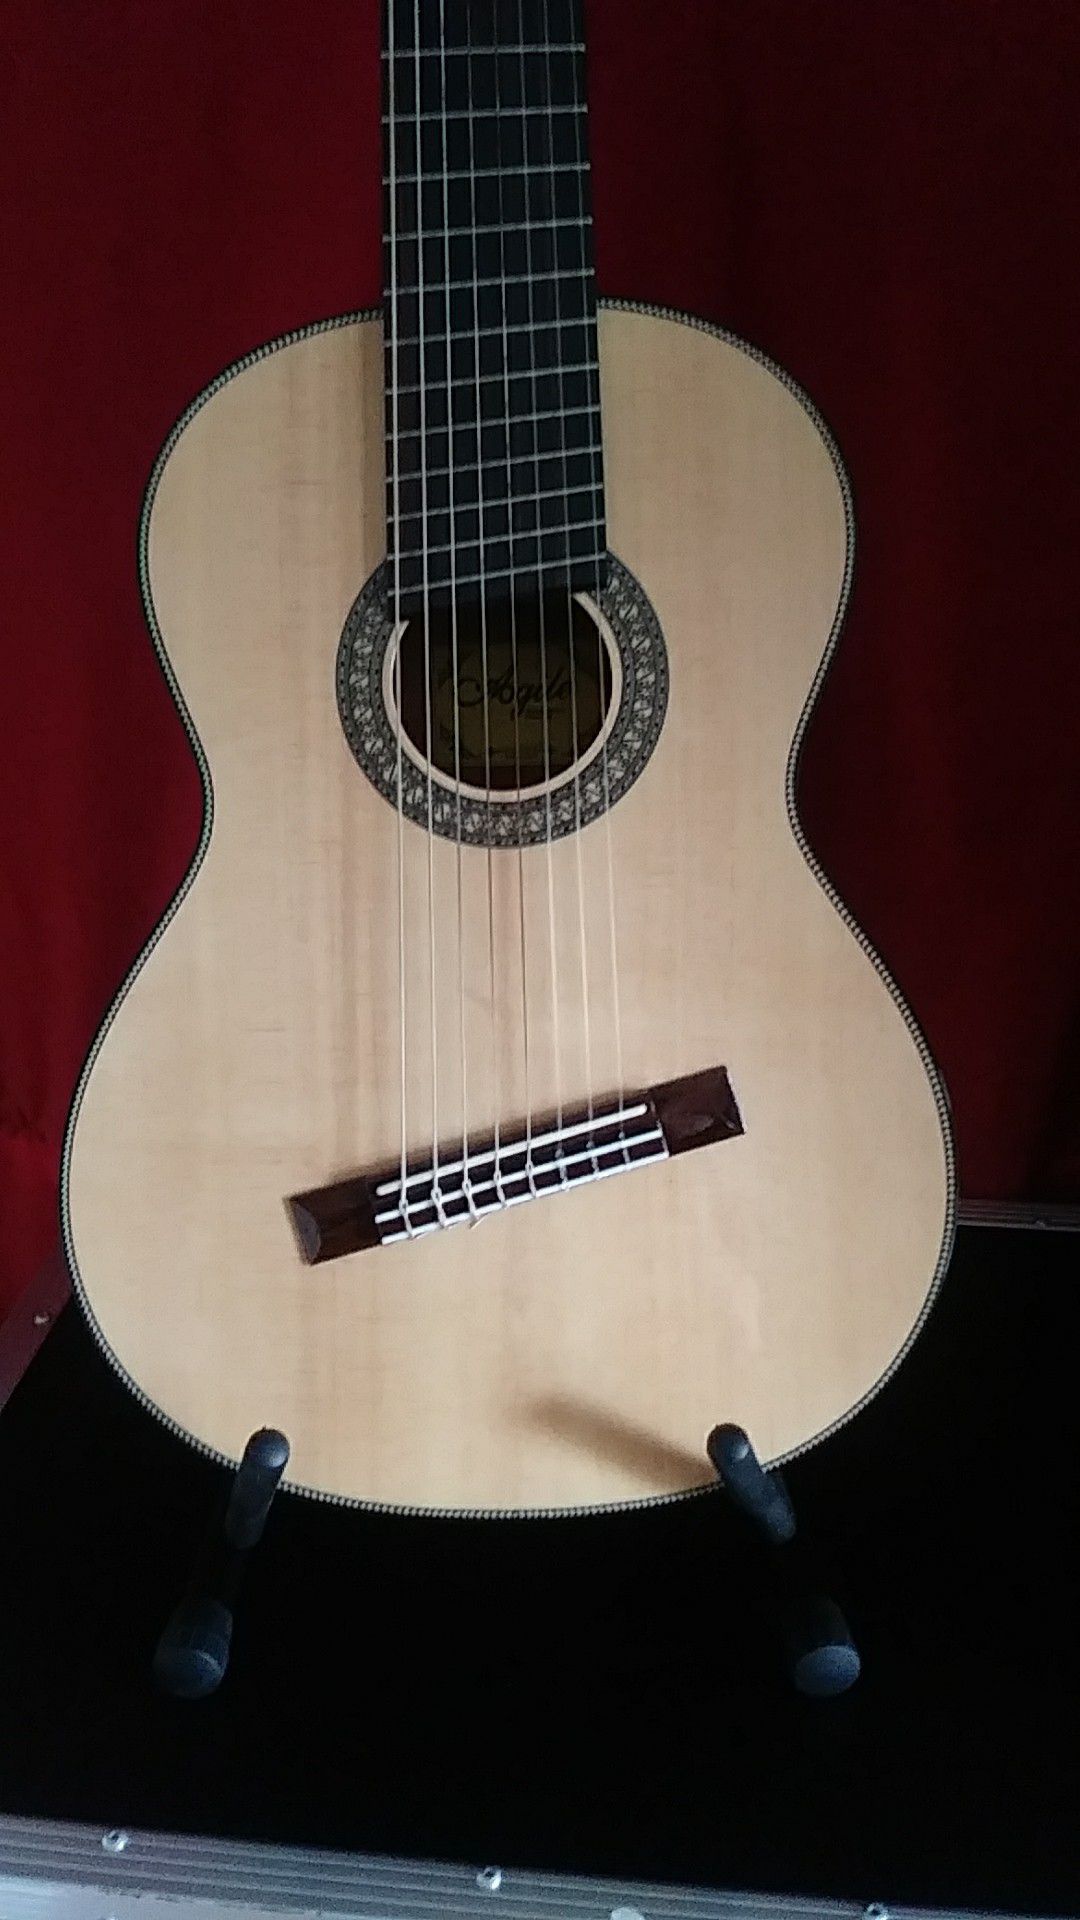 Agile Renaissance Classical 8 String Electric Acoustic Guitar #82527 EQ NA with hardshell case